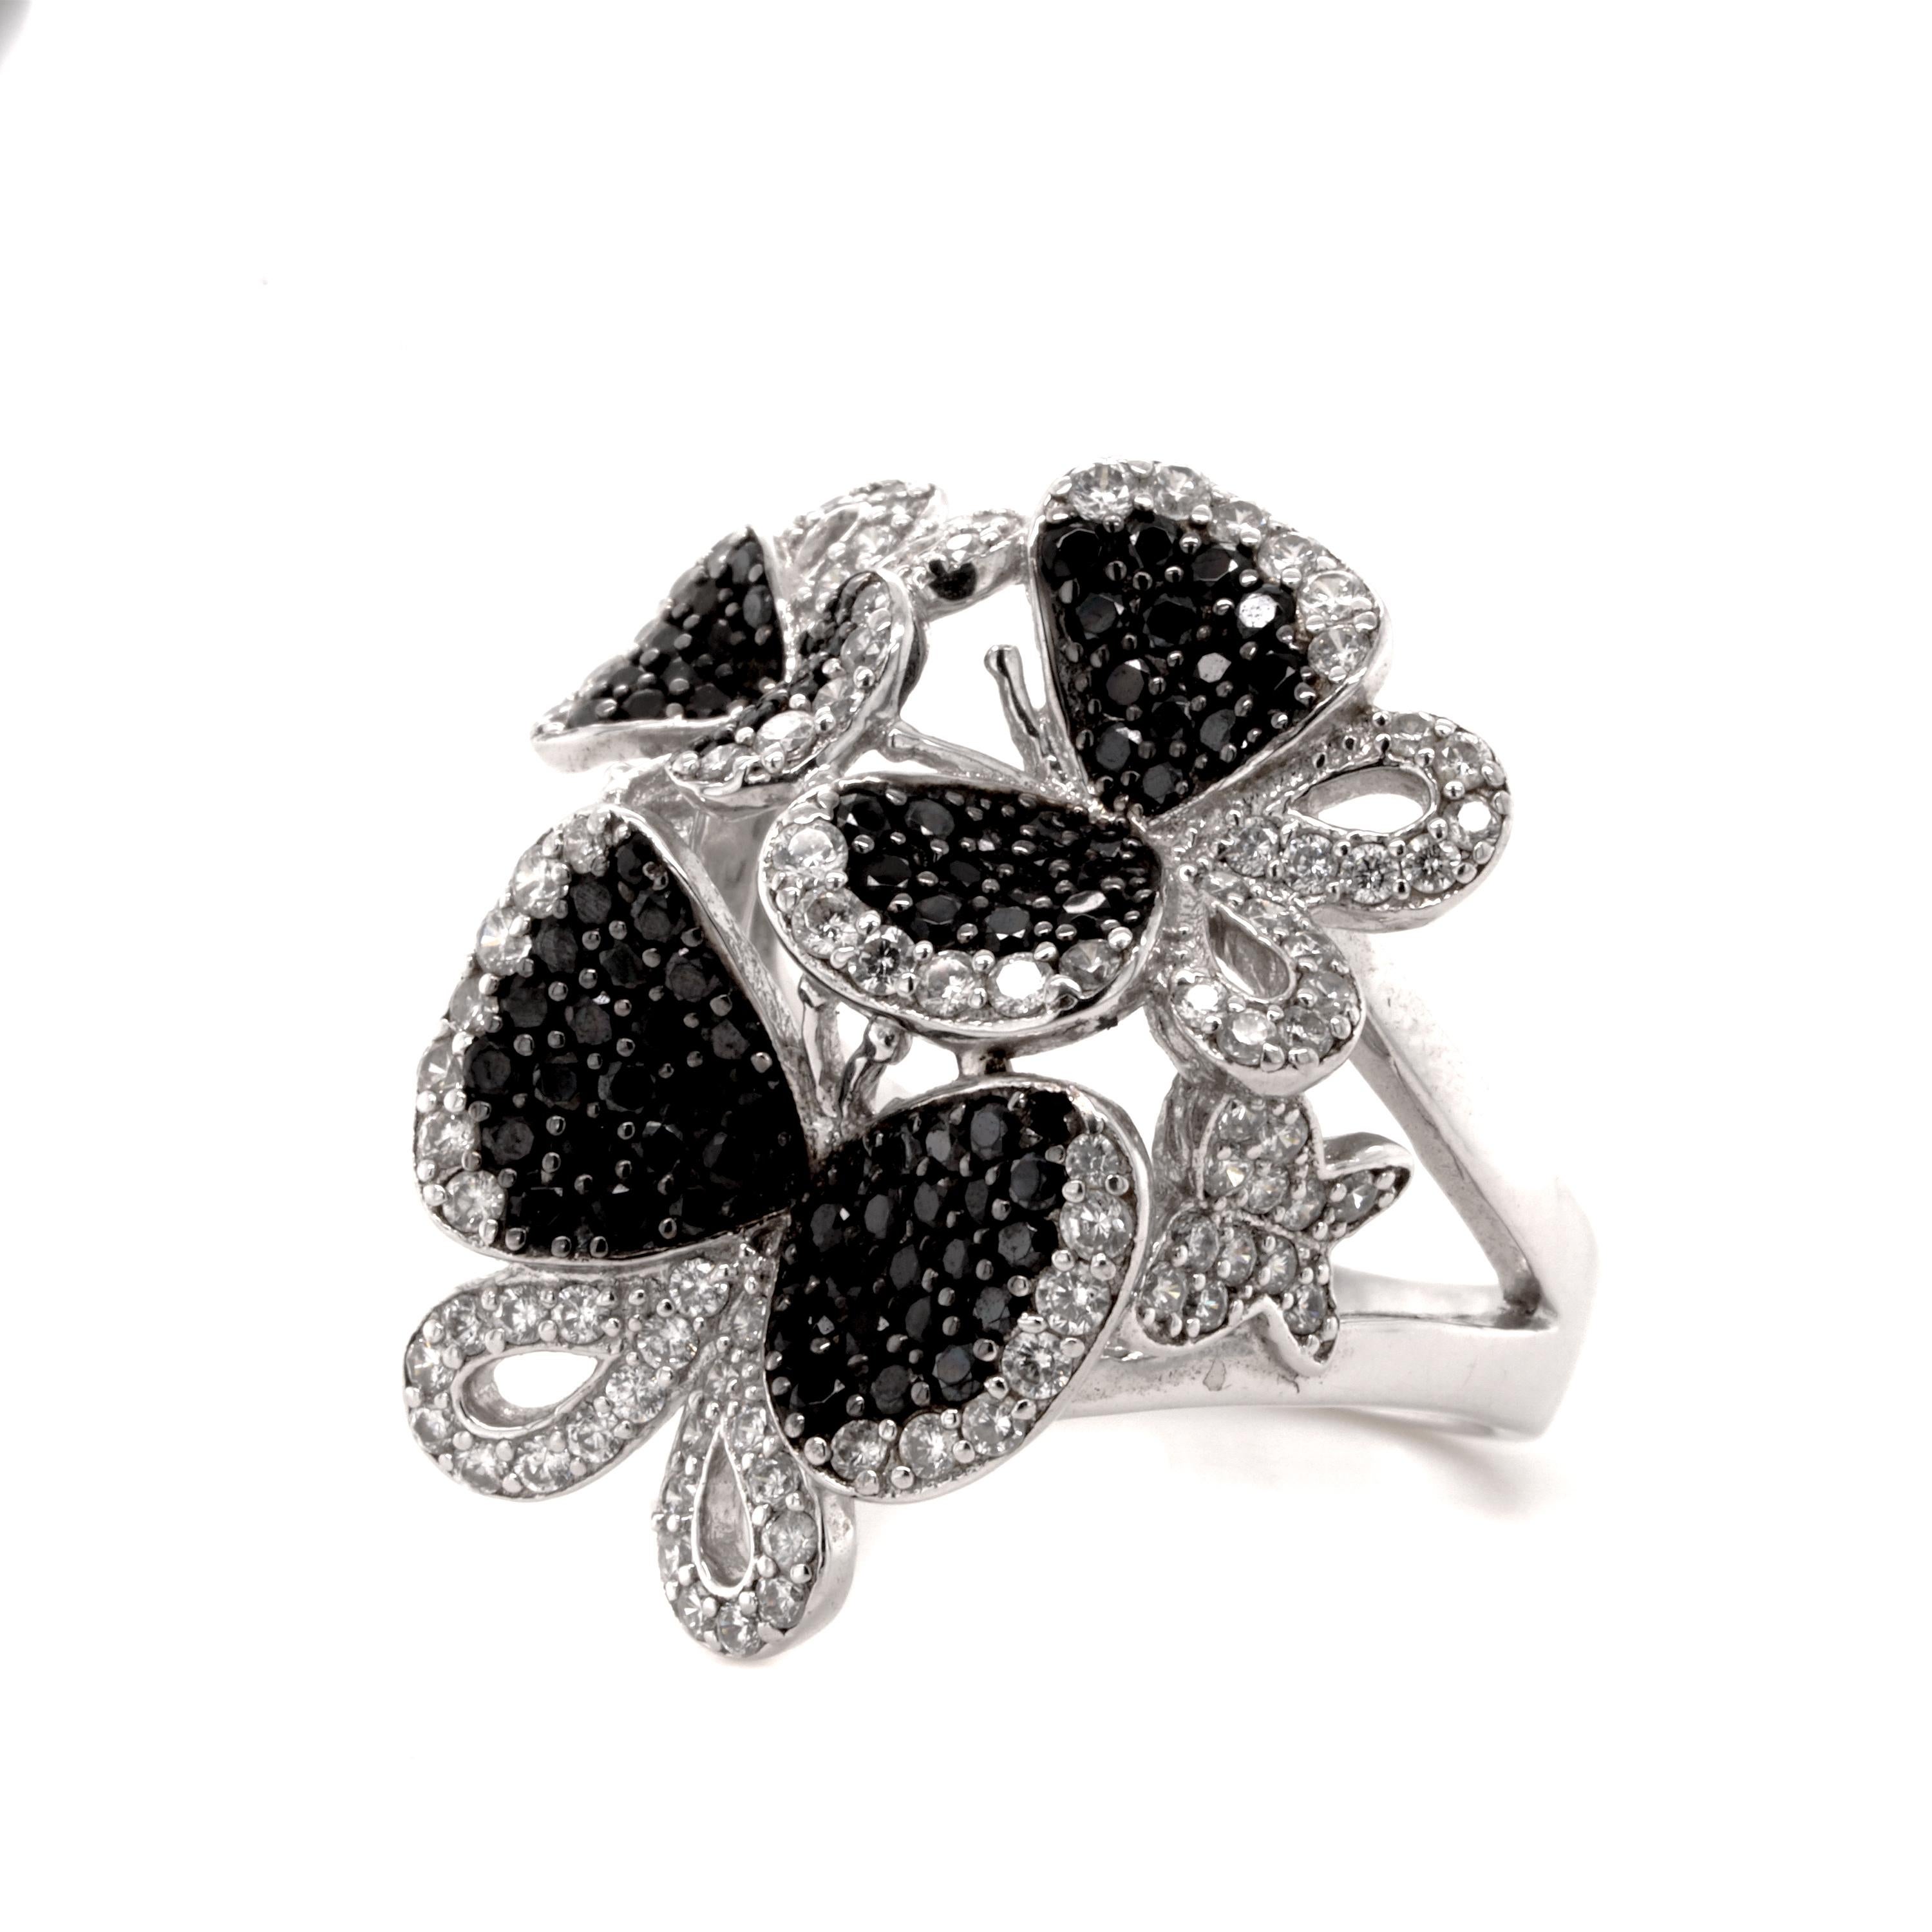 Butterfly captures the feminine essence and the carefree, joyful movement of these intricate and delicate creatures in sparkling weightless jewels. Butterfly cluster ring bejewelled in black and white cubic zirconia set in white rhodium plate on